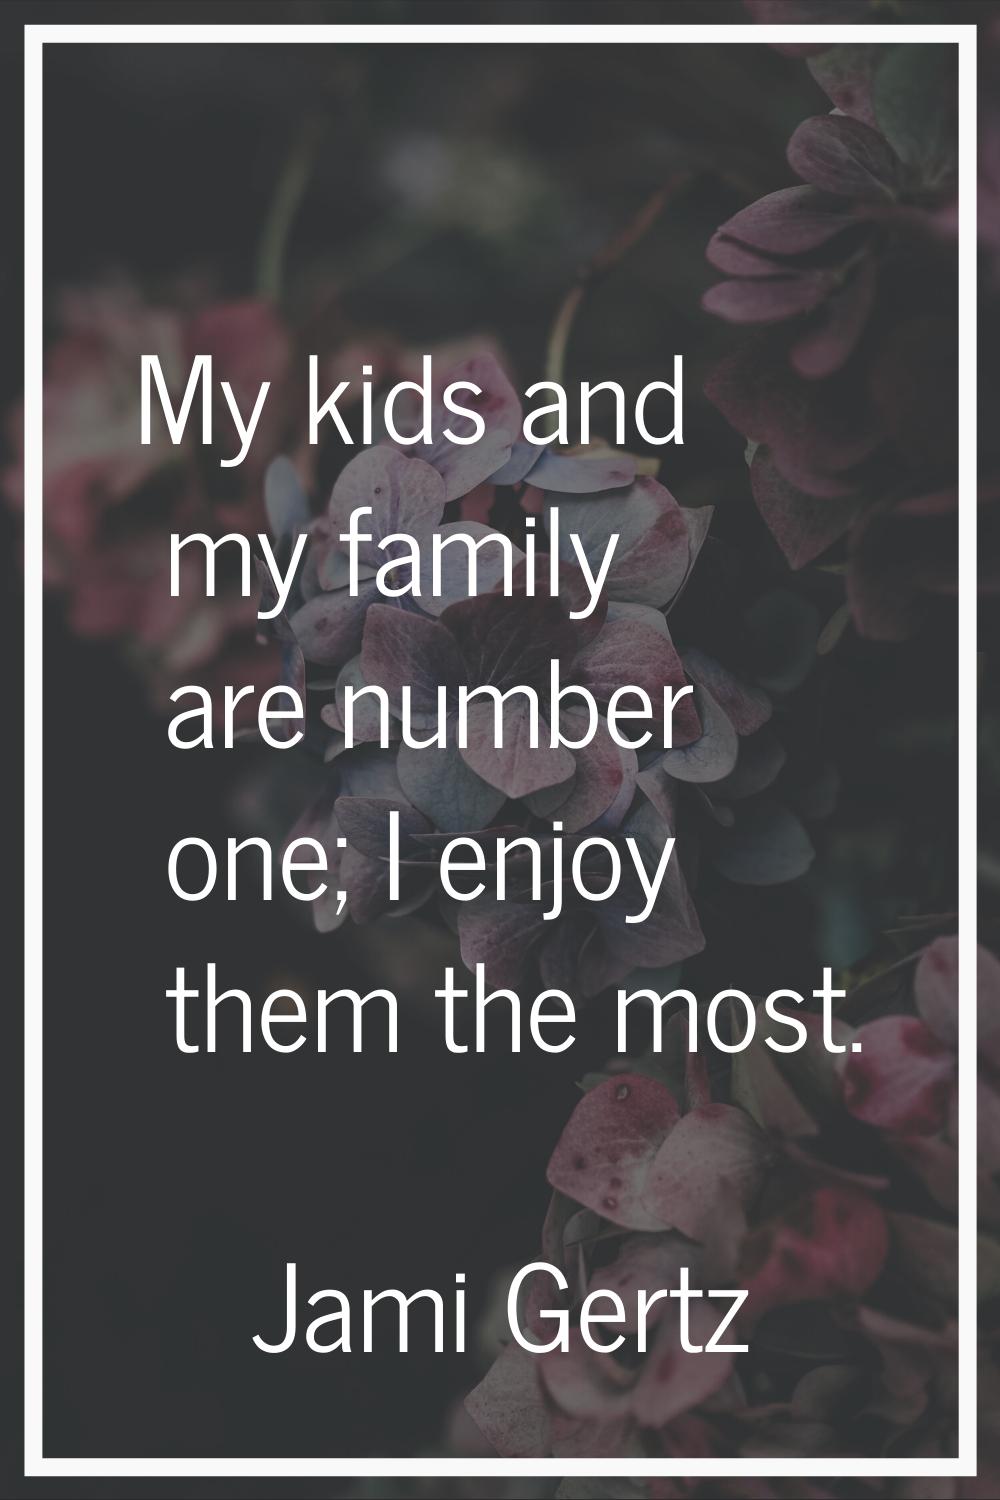 My kids and my family are number one; I enjoy them the most.